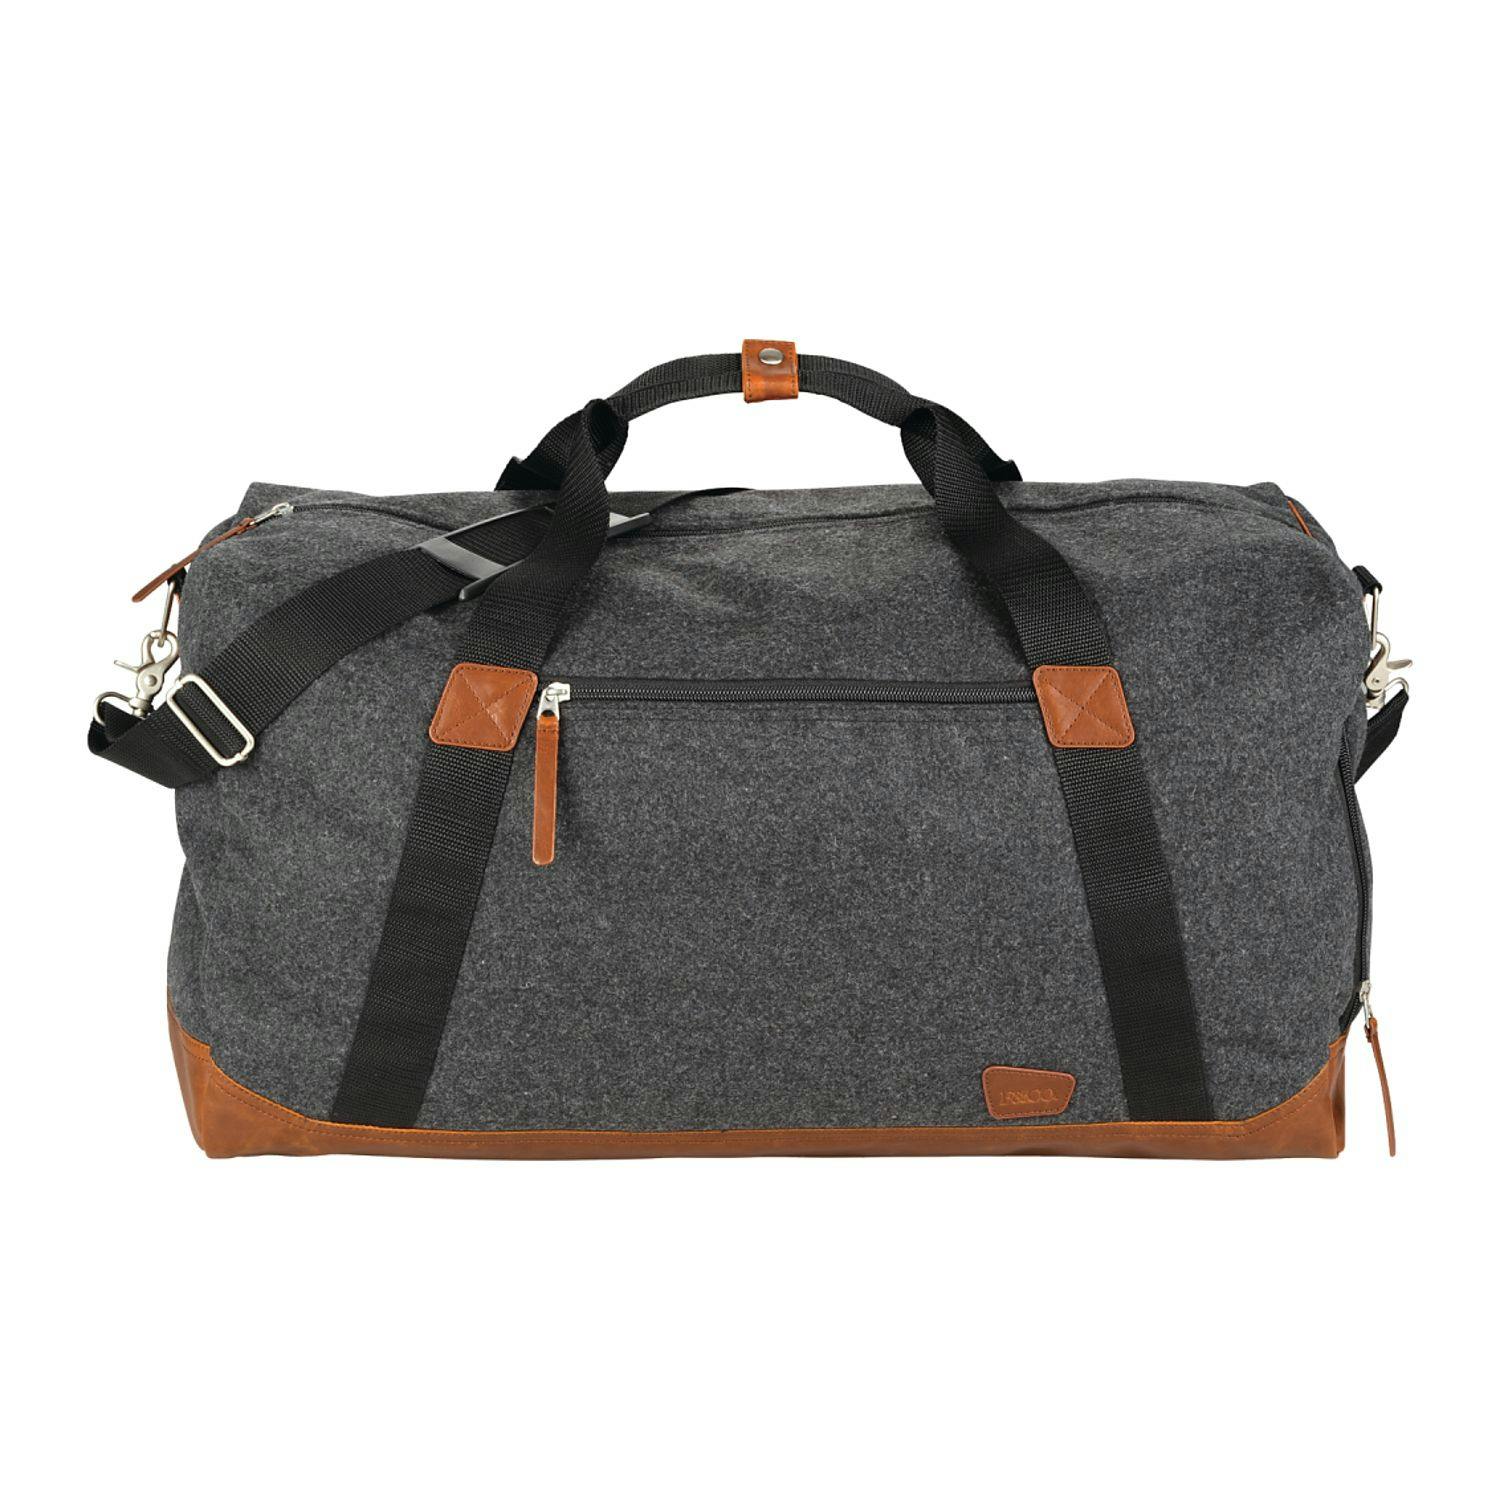 Field & Co.® Campster 22" Duffel Bag - additional Image 1